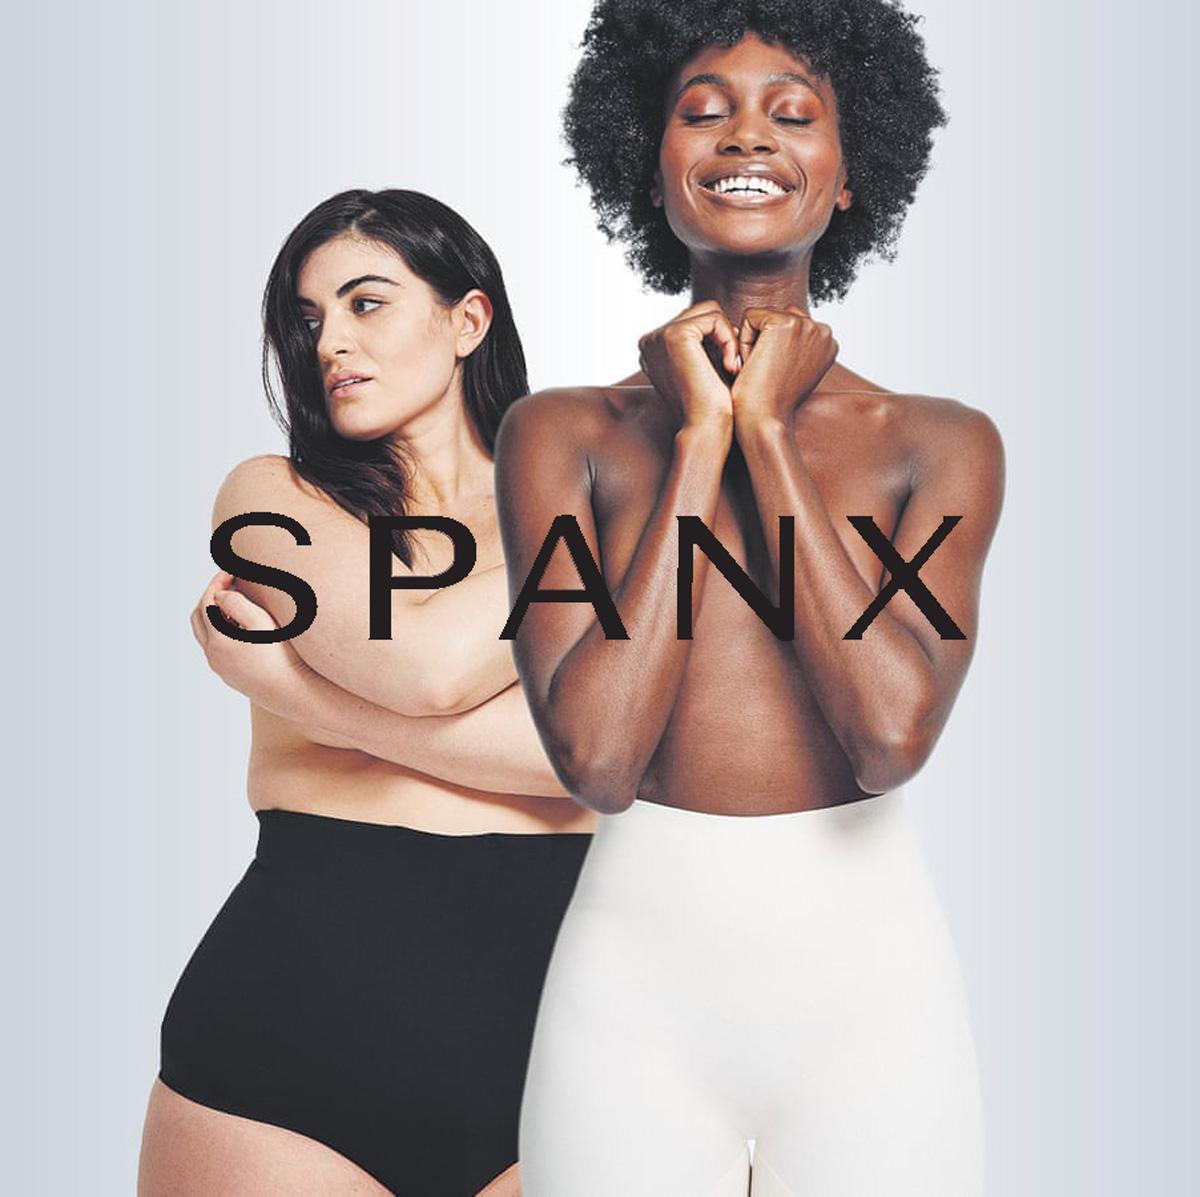 Spanx Size Get your perfect shapewear size When